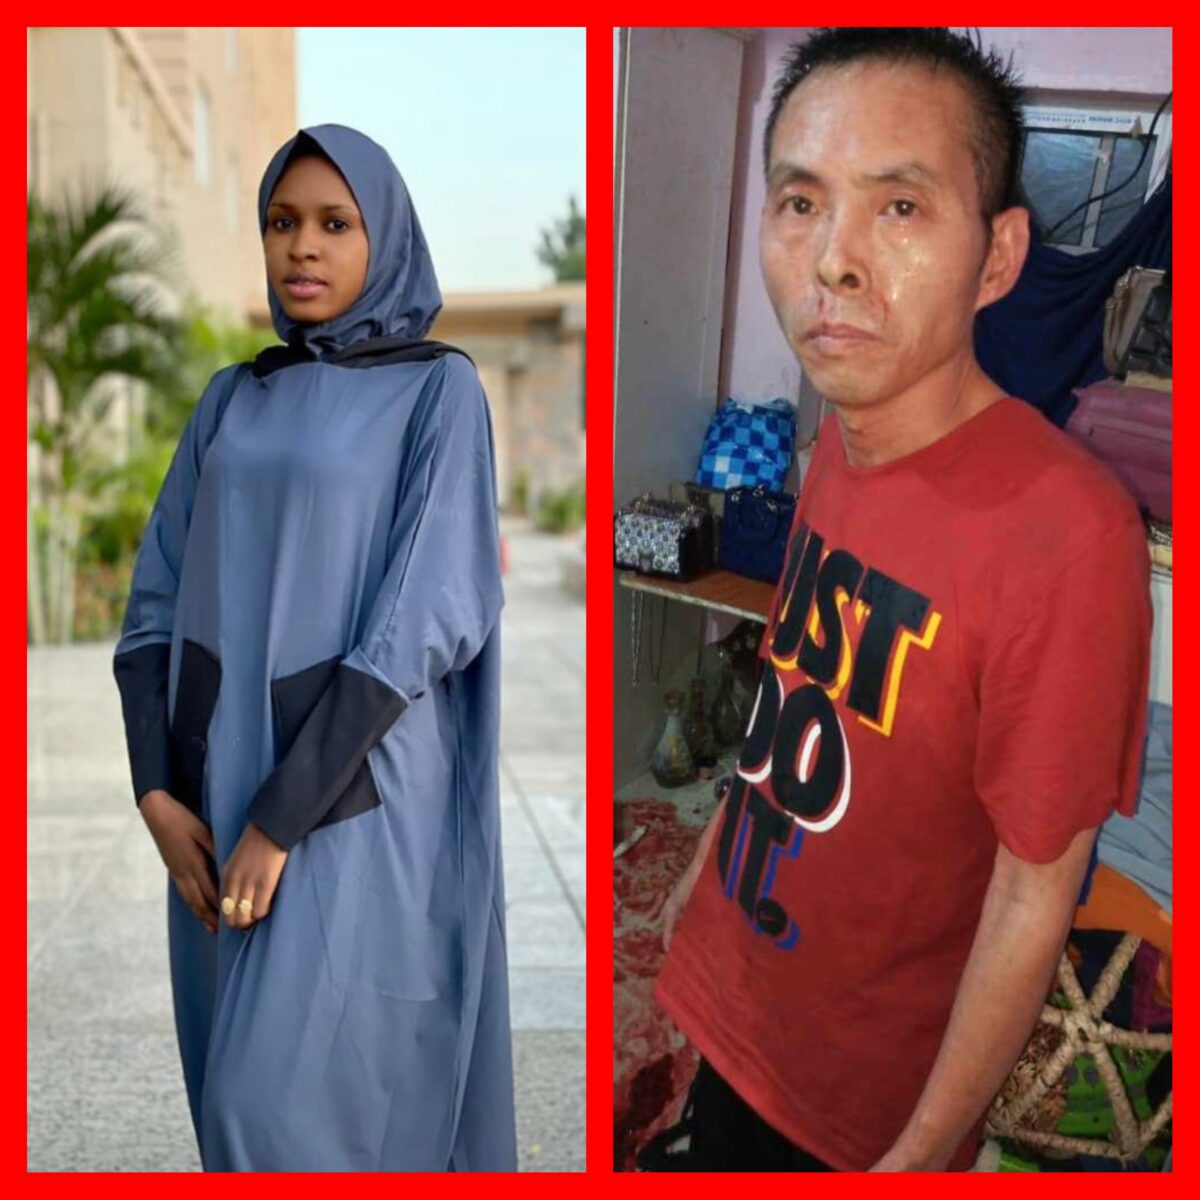 Ummita: Chinese Man Stabs Lover To Death In Kano - Here's What We Know